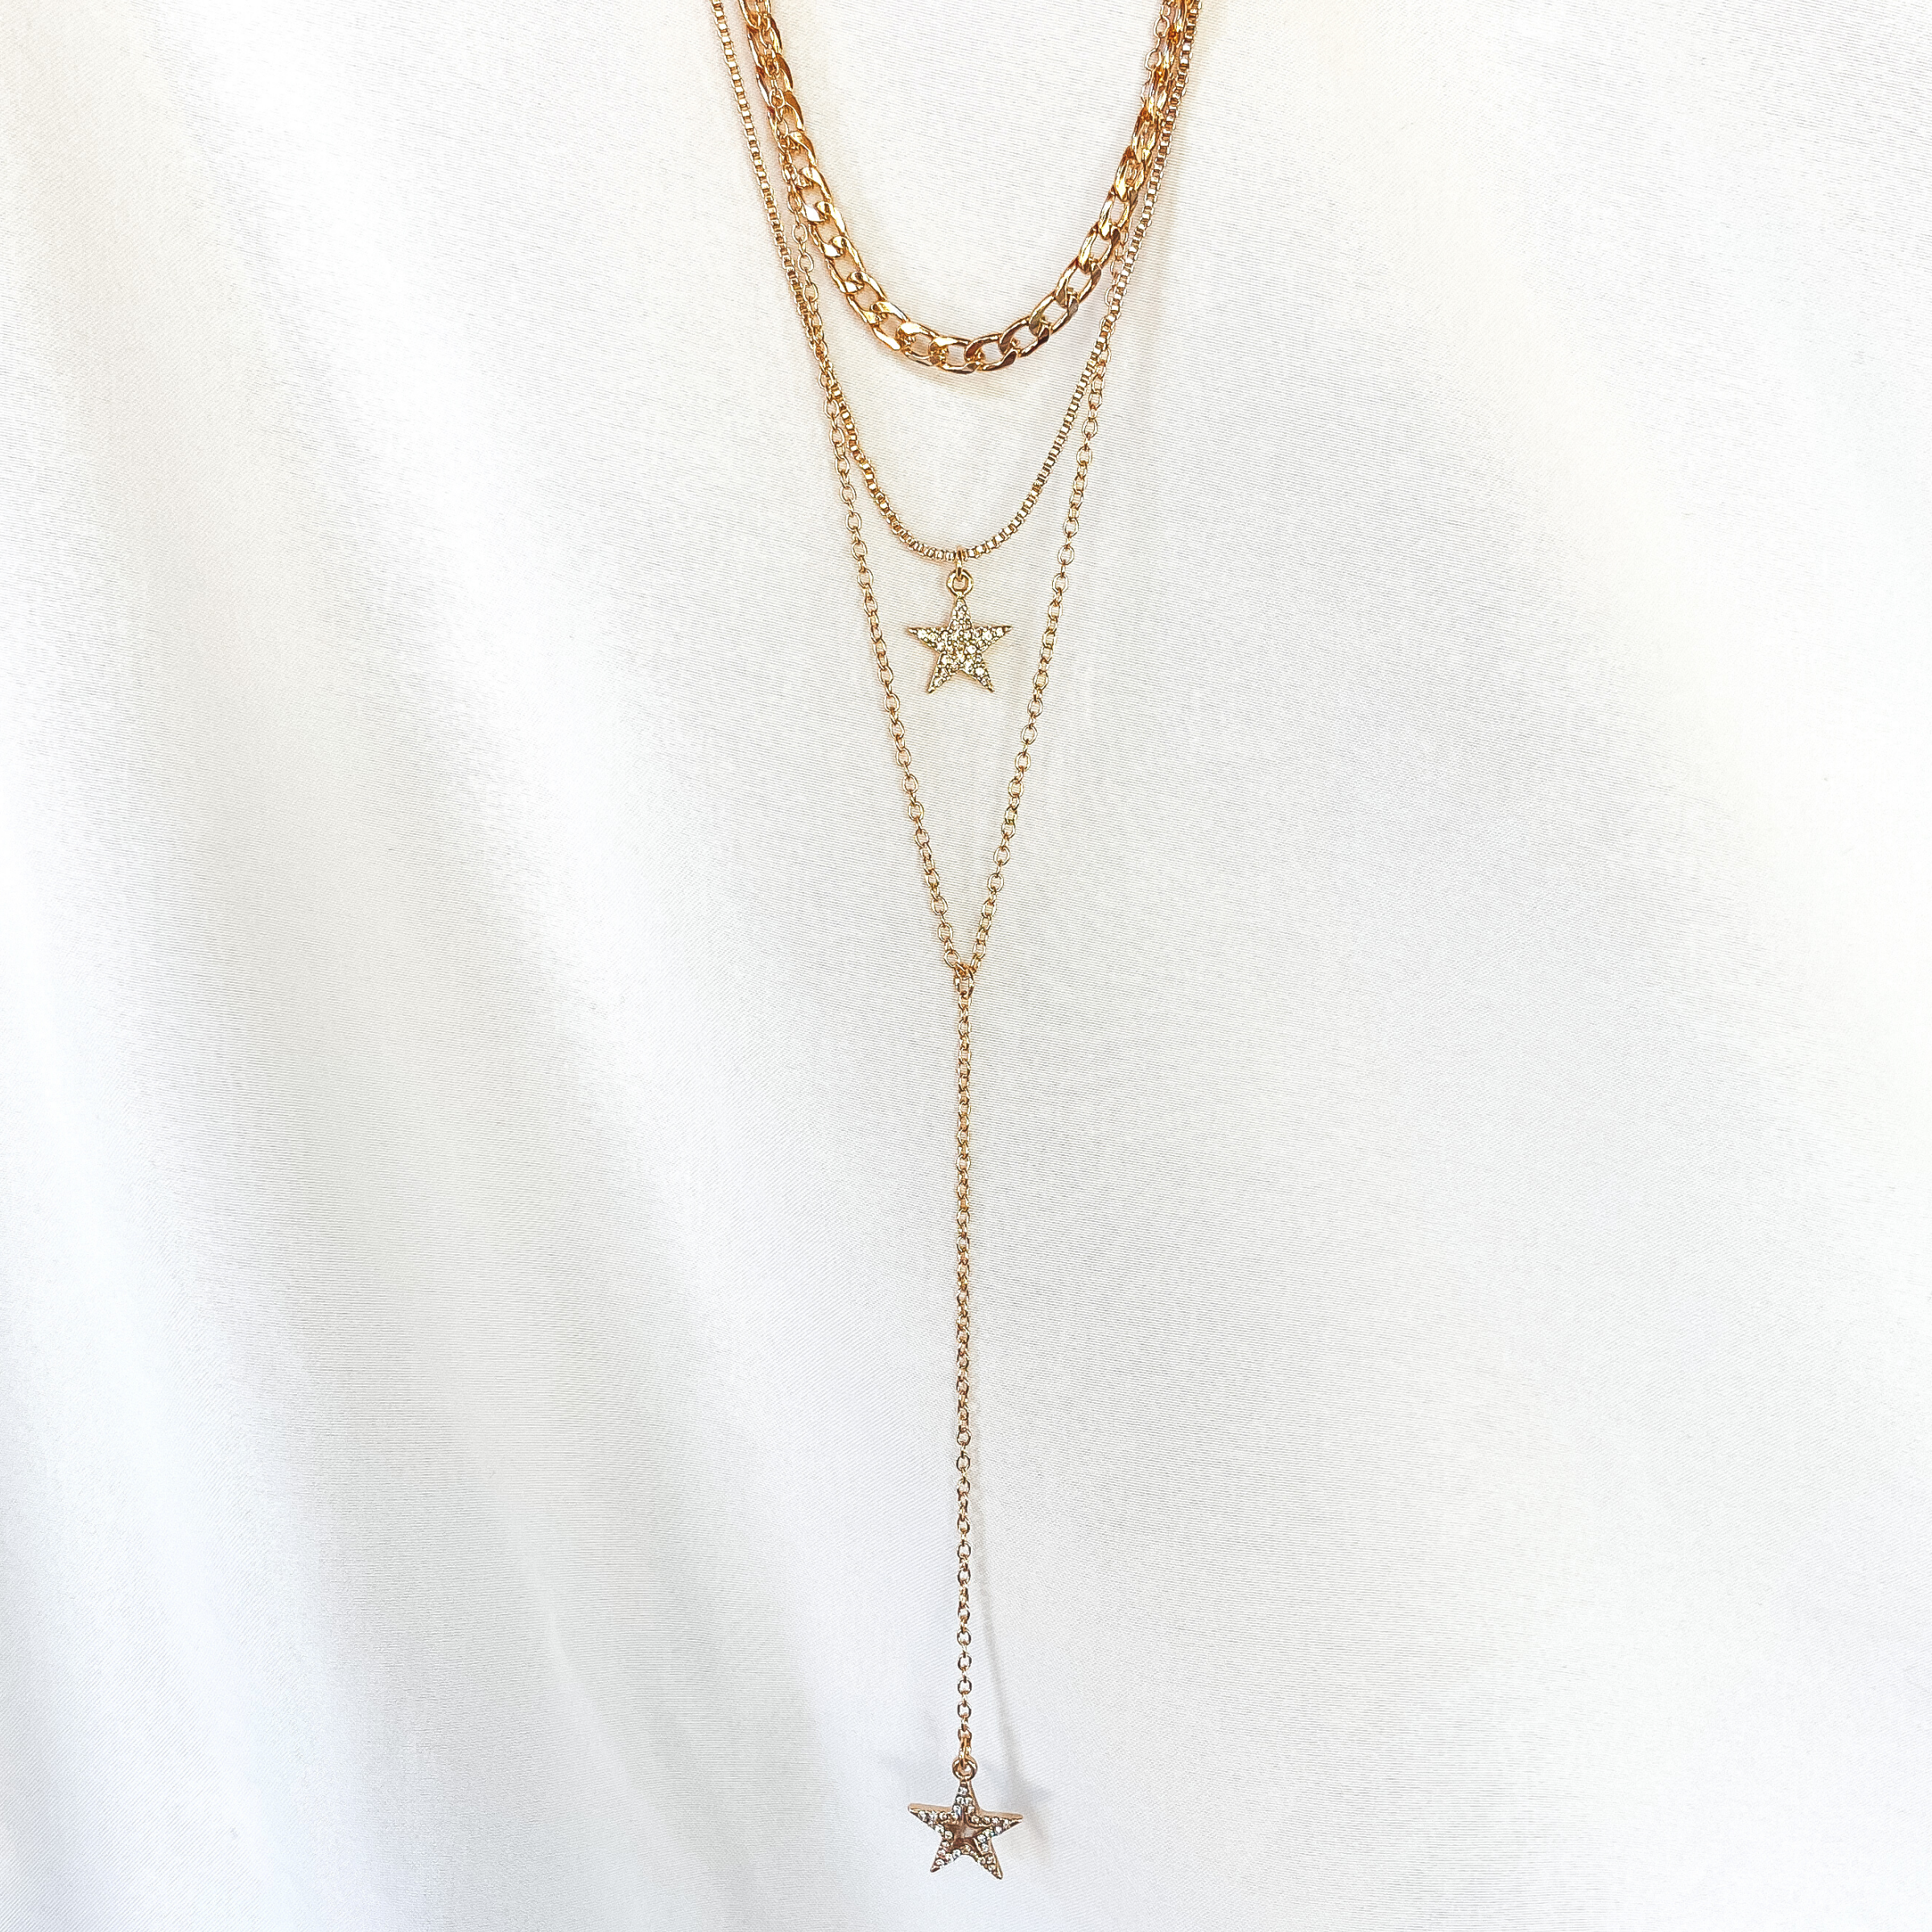 Three Strand Drop Chain Necklace with Crystal Star Pendants in Gold - Giddy Up Glamour Boutique